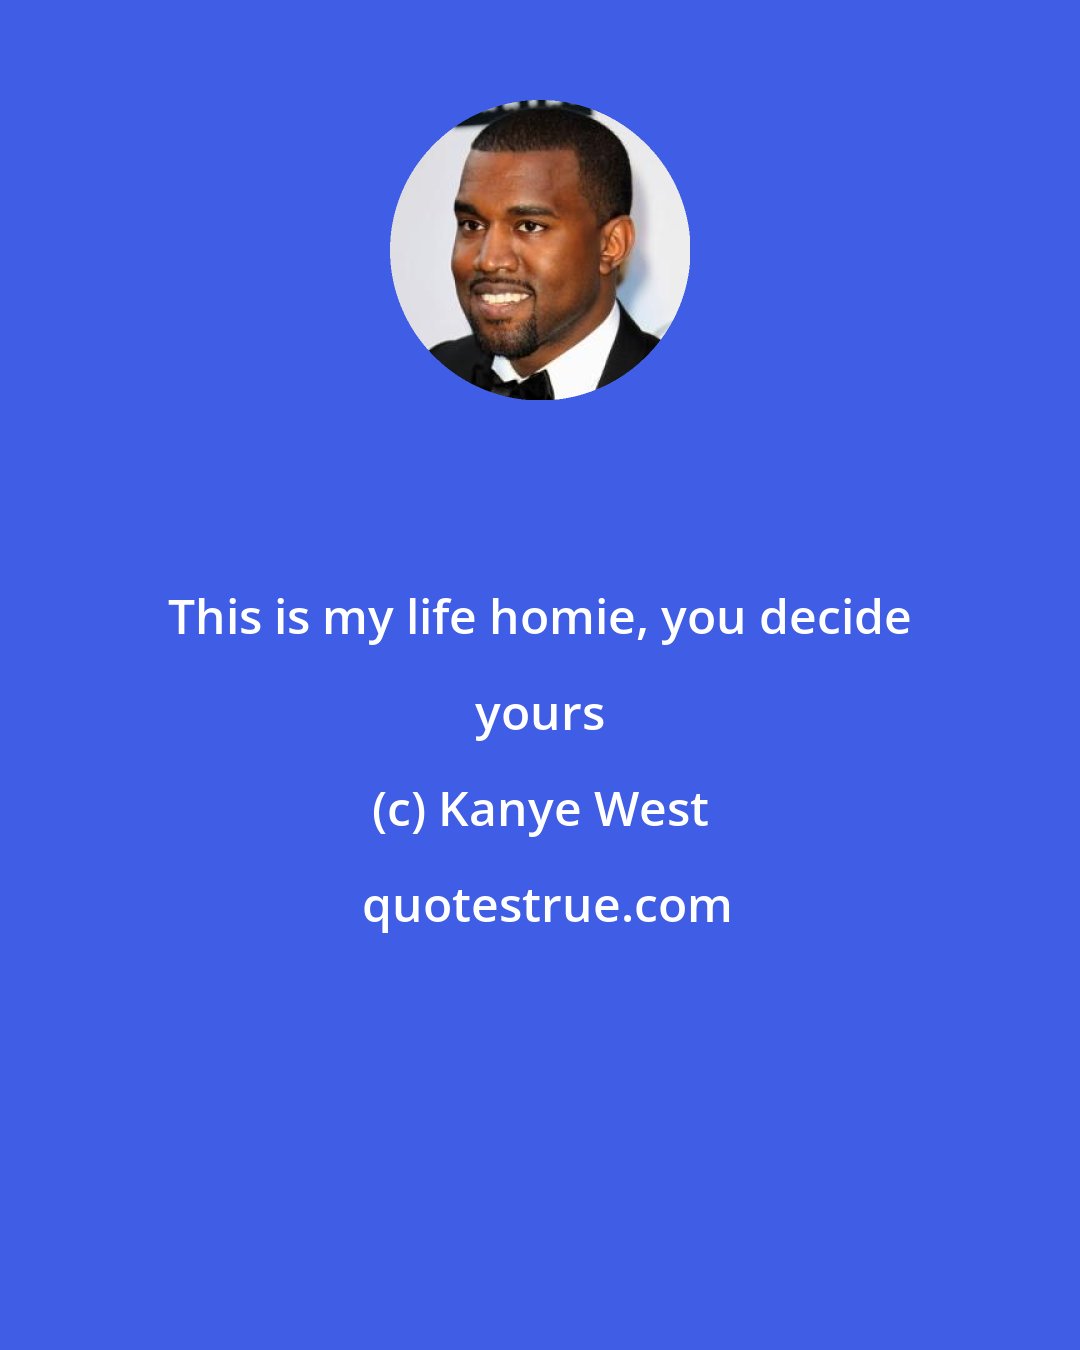 Kanye West: This is my life homie, you decide yours